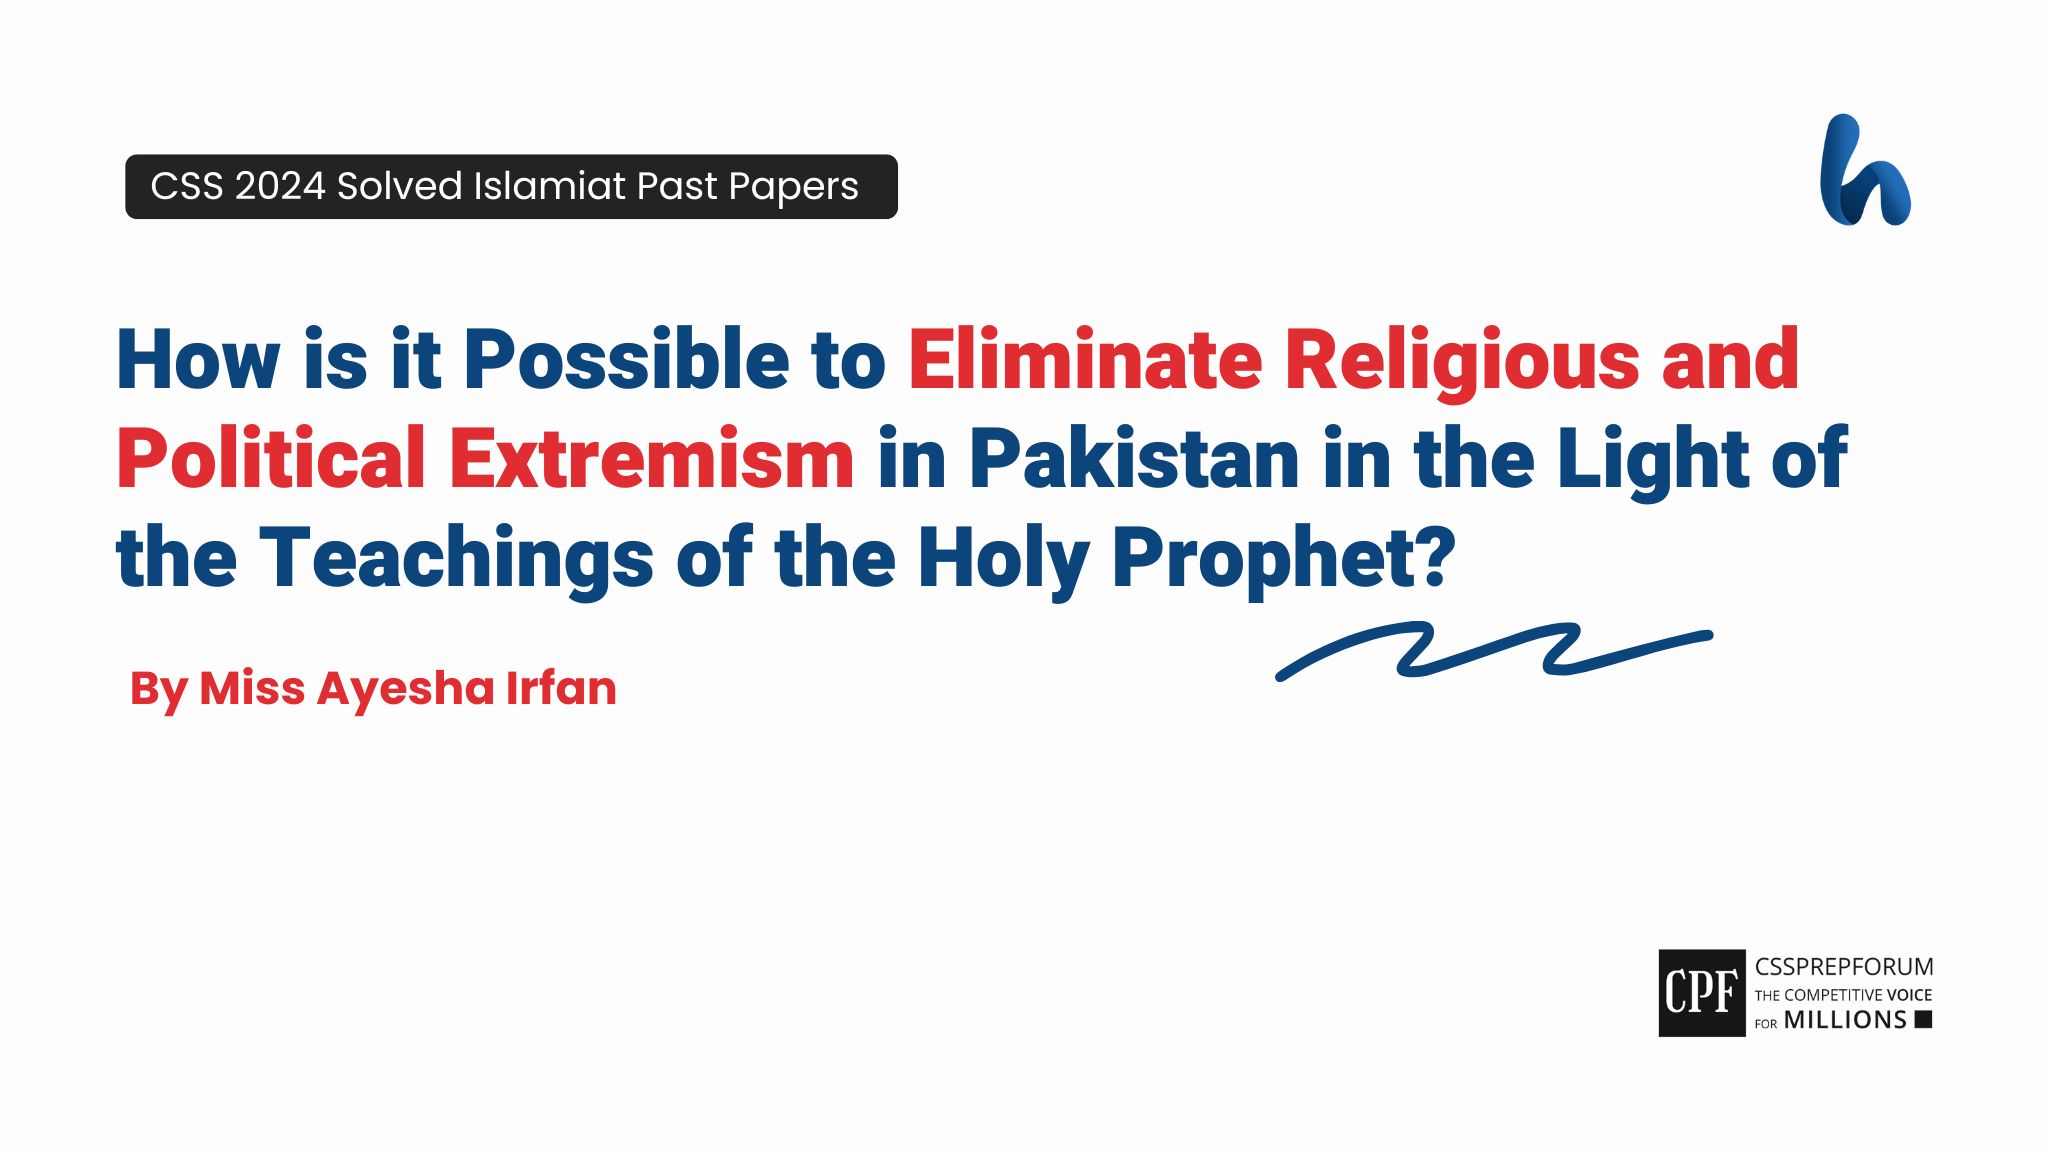 CSS Islamiat 2024 question, "Possibilities to Eliminate Extremism in Pakistan" is Solved by Miss Ayesha Irfan...